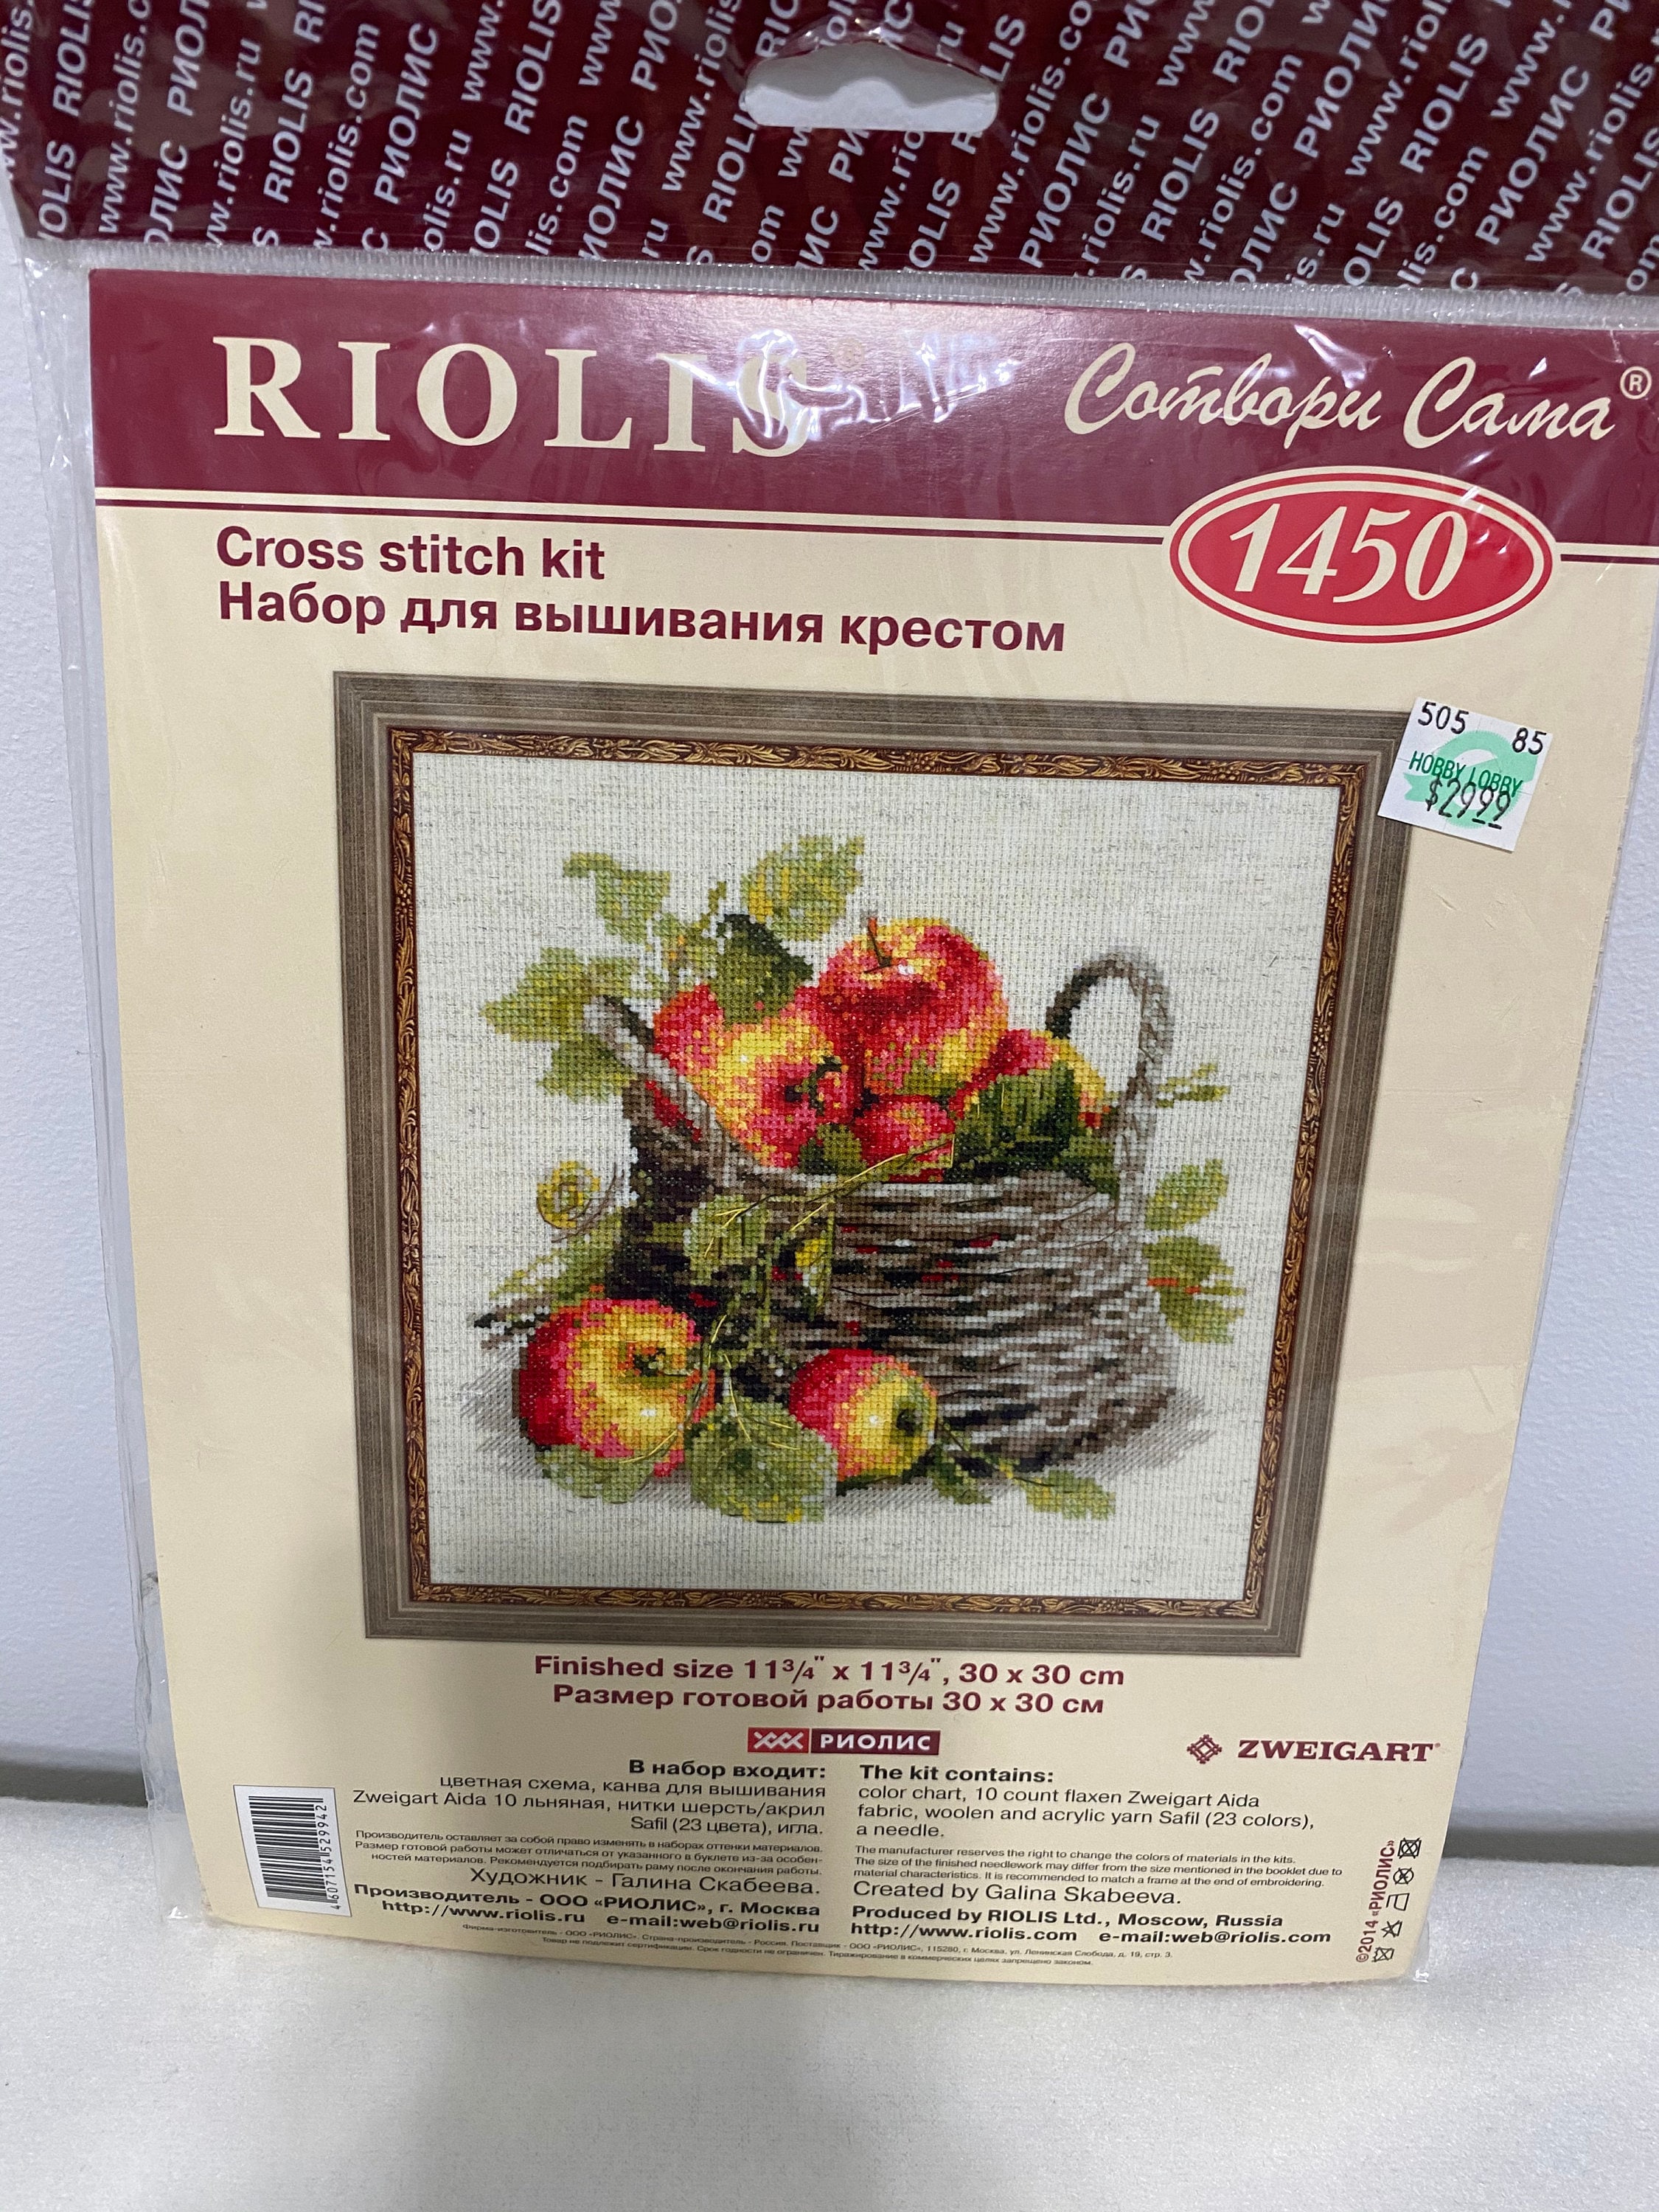 Riolis Apples in Basket Cross Stitch Kit 1450 New in Package SEALED 